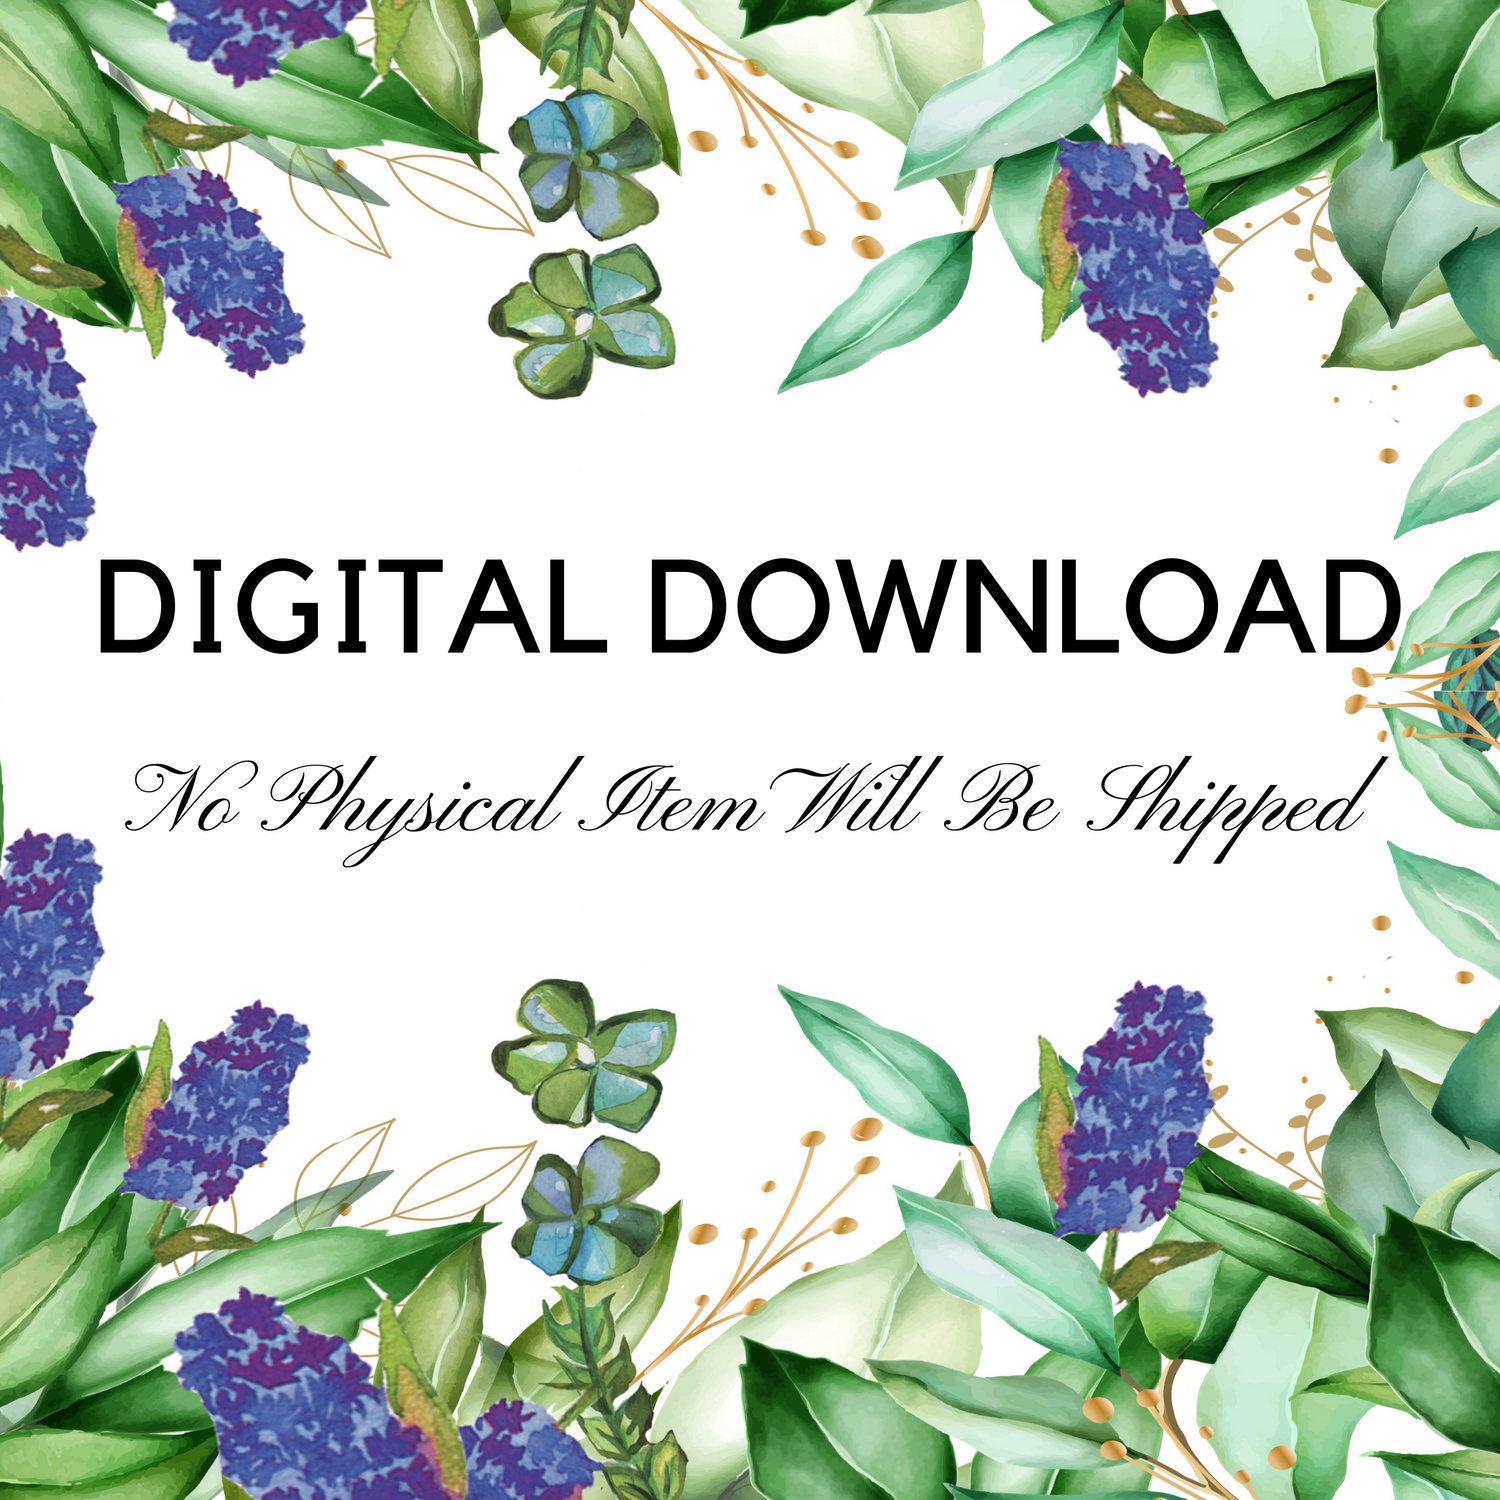 The announcement of the digital download by ArisaTeam